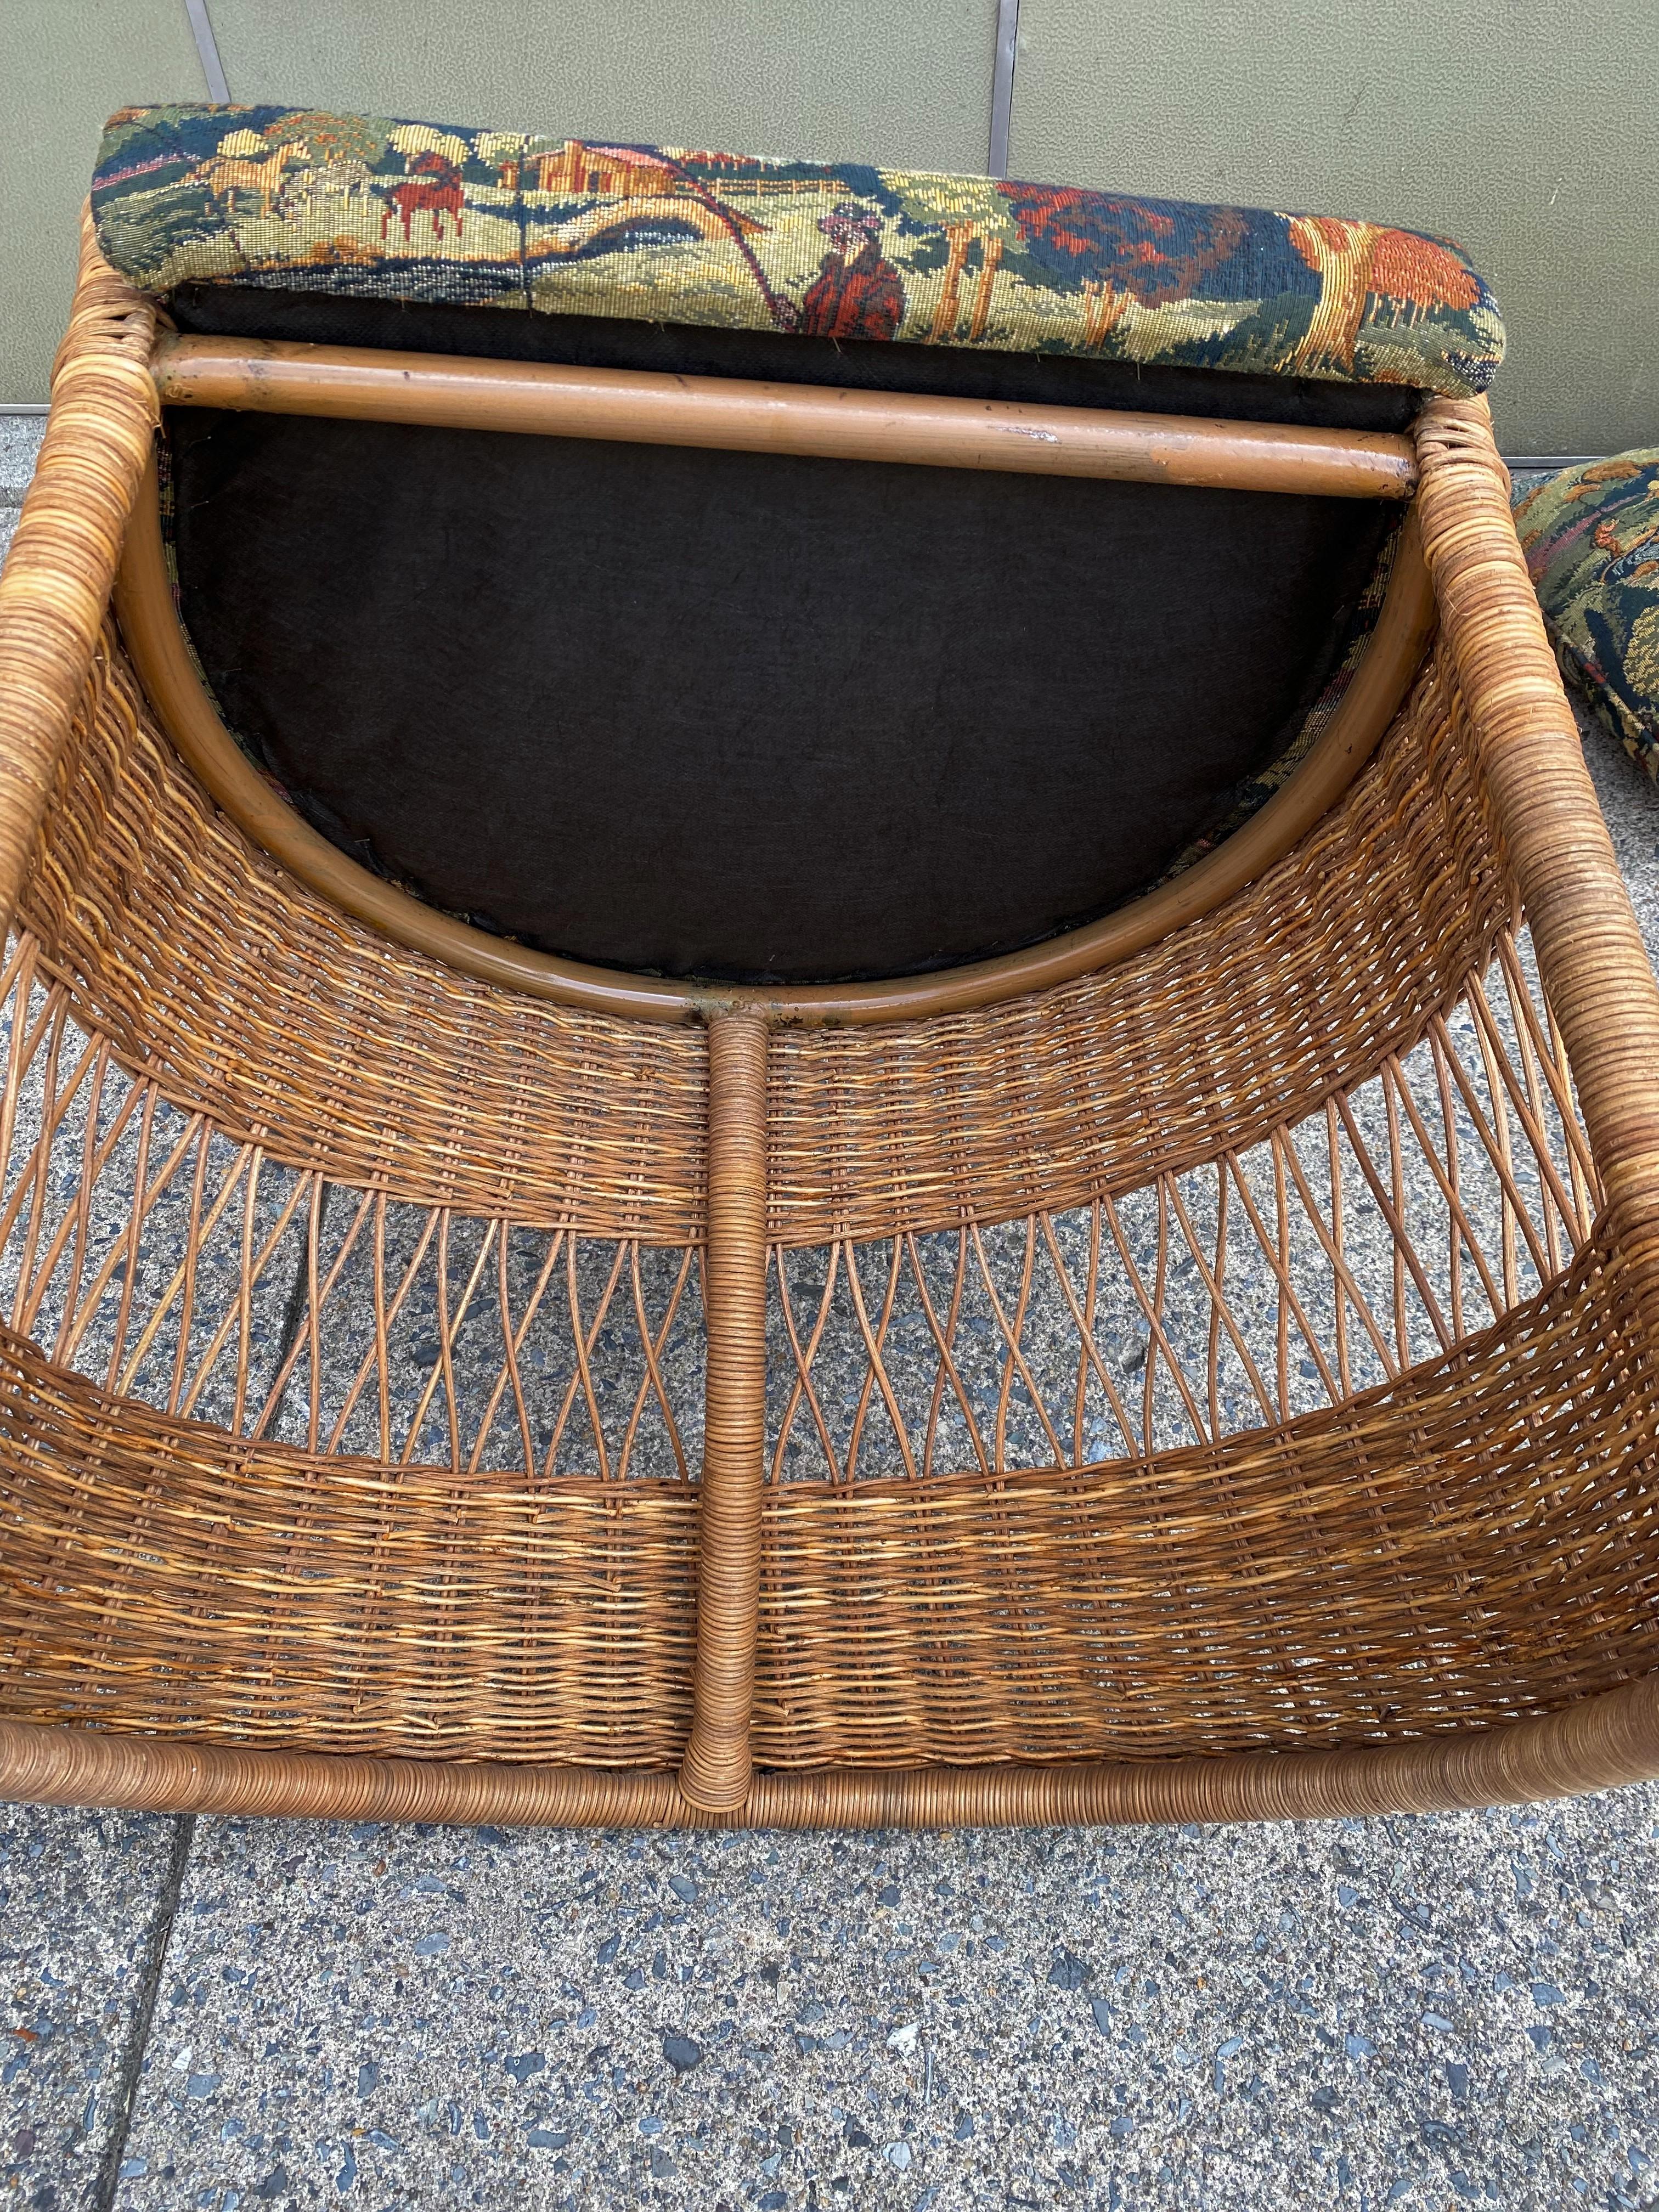 Natural Wicker/Rattan Mid Century Tulip/Barrel Chairs W/ Fishing Upholstery Pair For Sale 6